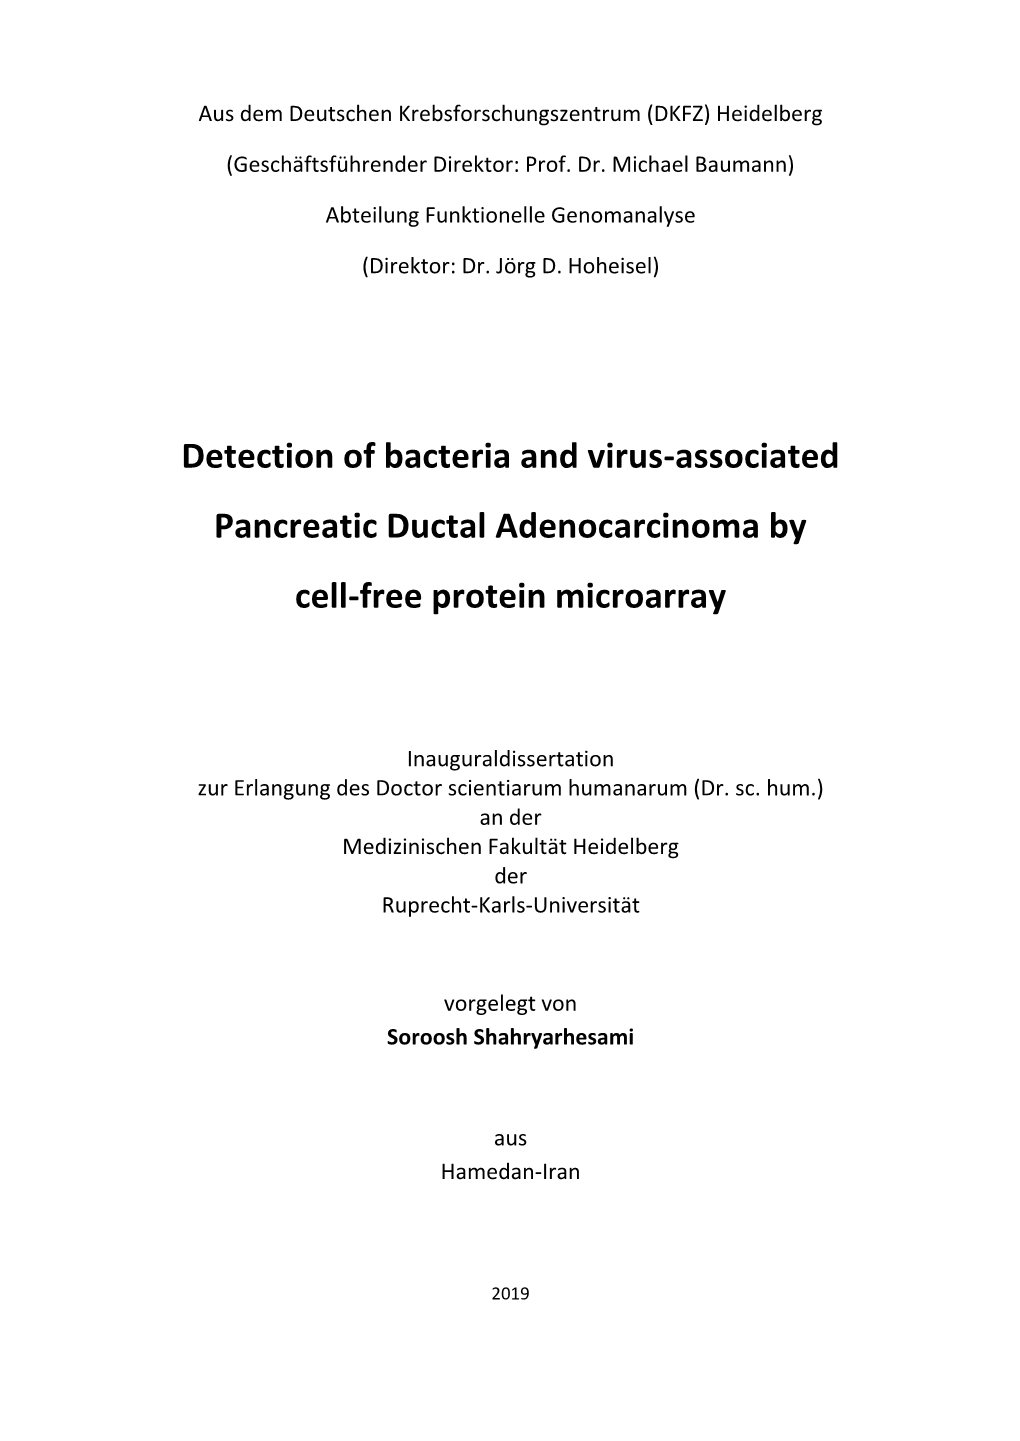 Detection of Bacteria and Virus-Associated Pancreatic Ductal Adenocarcinoma By